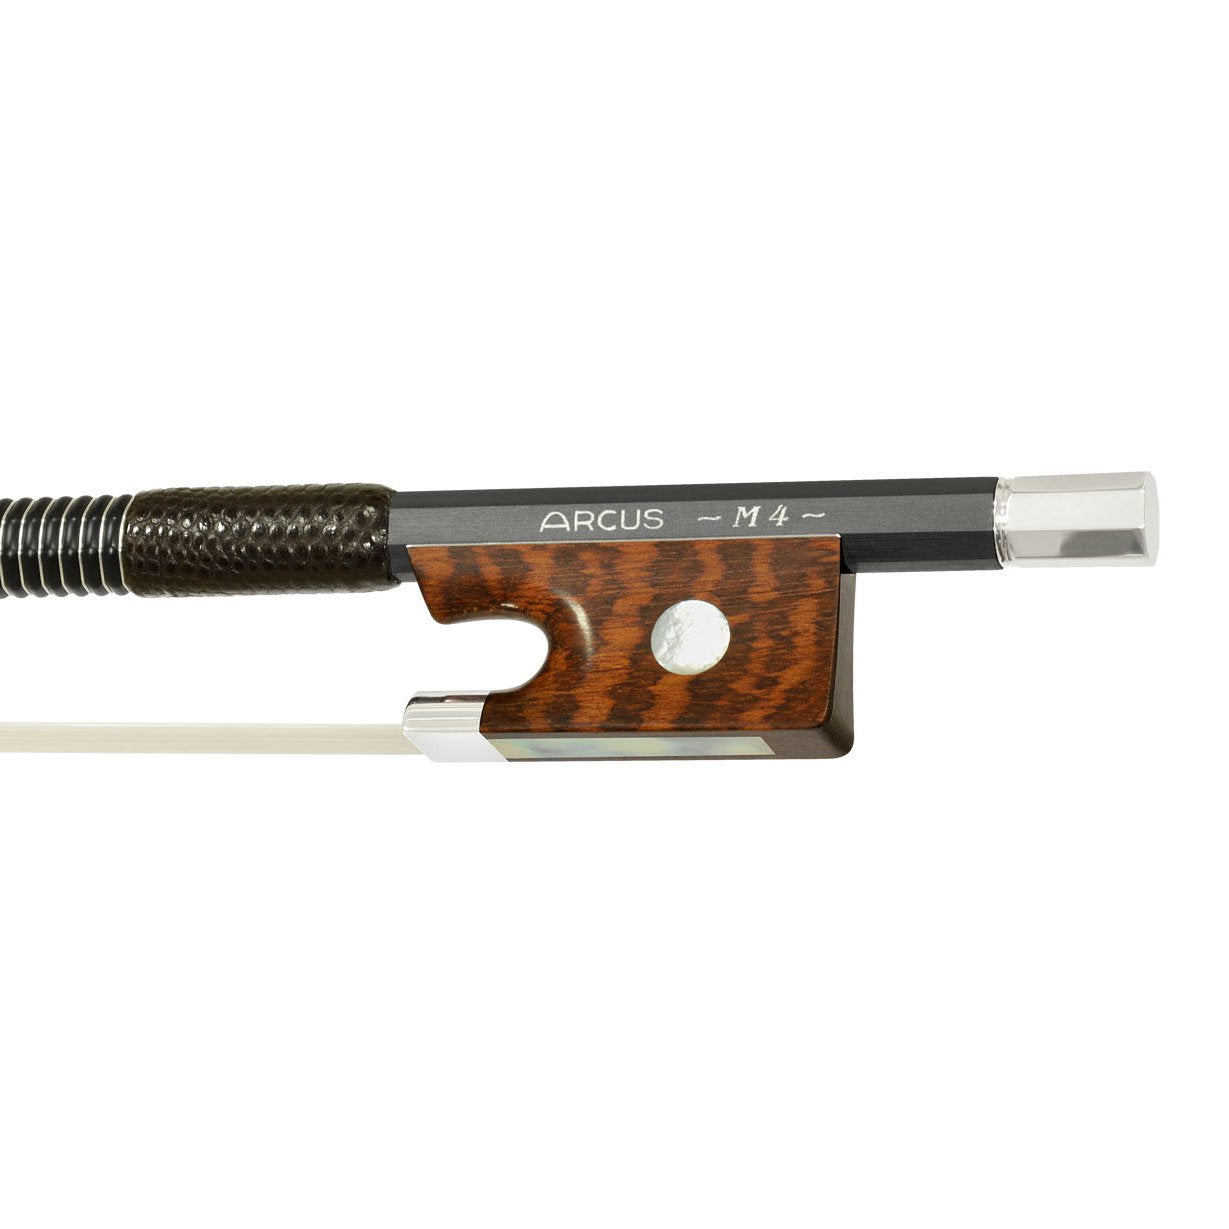 Arcus Cello Bow, M4, Stainless steel, Round String Power - Violin Shop